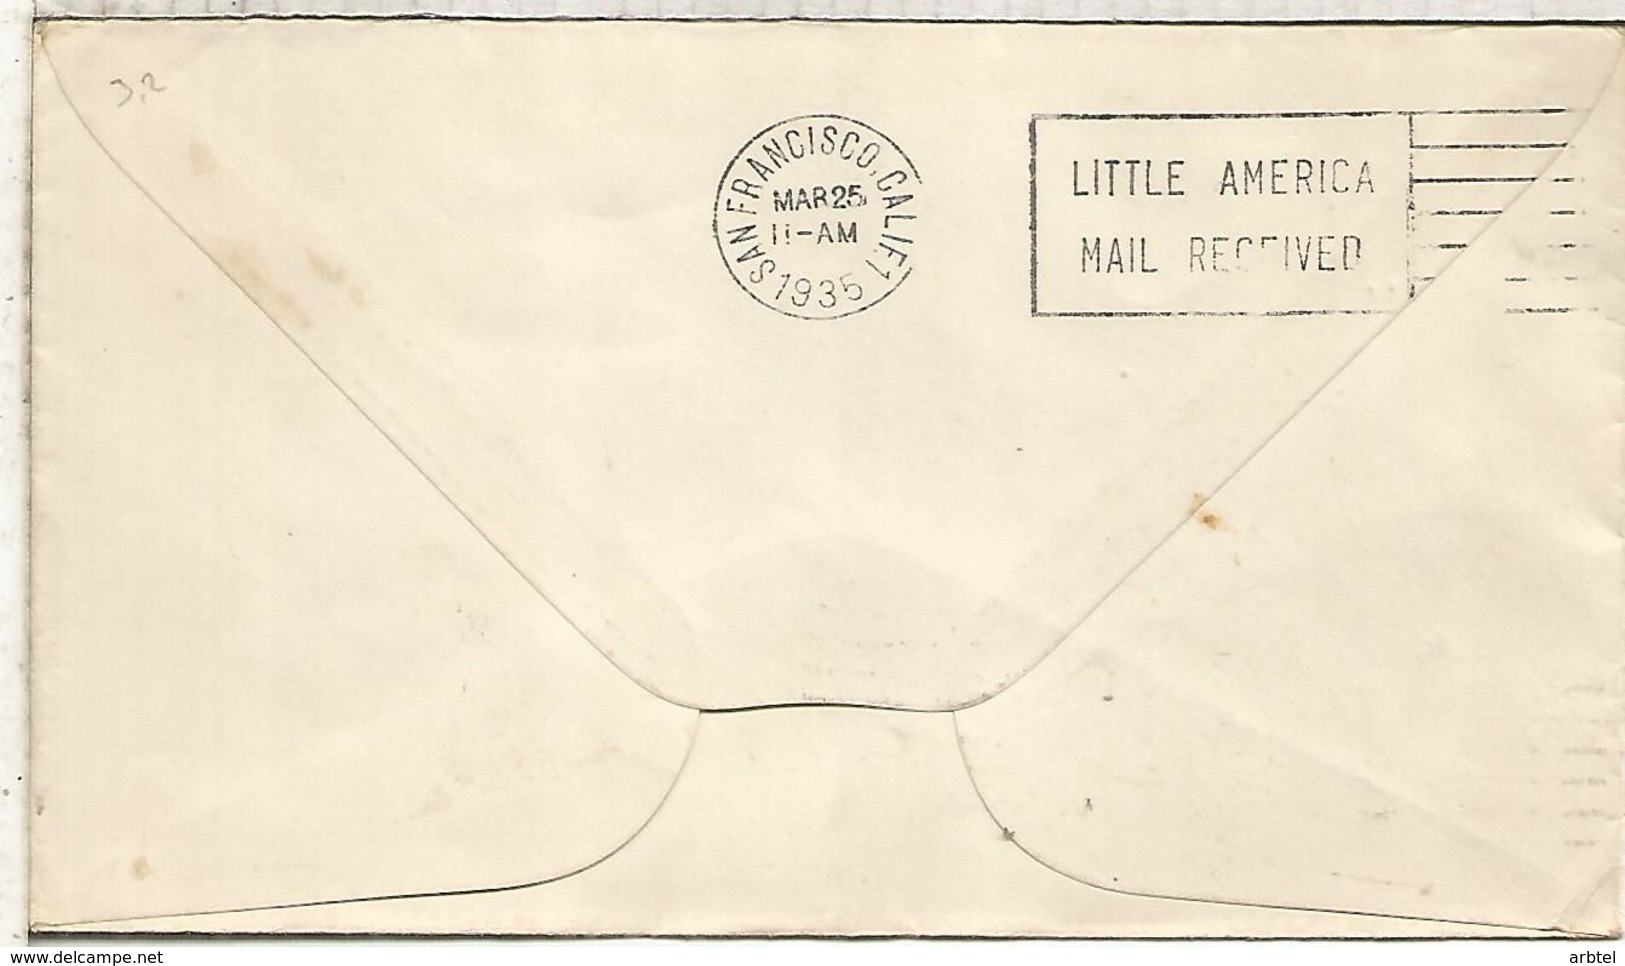 USA 1934 BYRD ANTARCTIC EXPEDITION LITTLE AMERICA POSTMAR WITH VERY RARE DATE 30 JAN 1934 INSTEAD USUAL 31 JAN - Spedizioni Antartiche